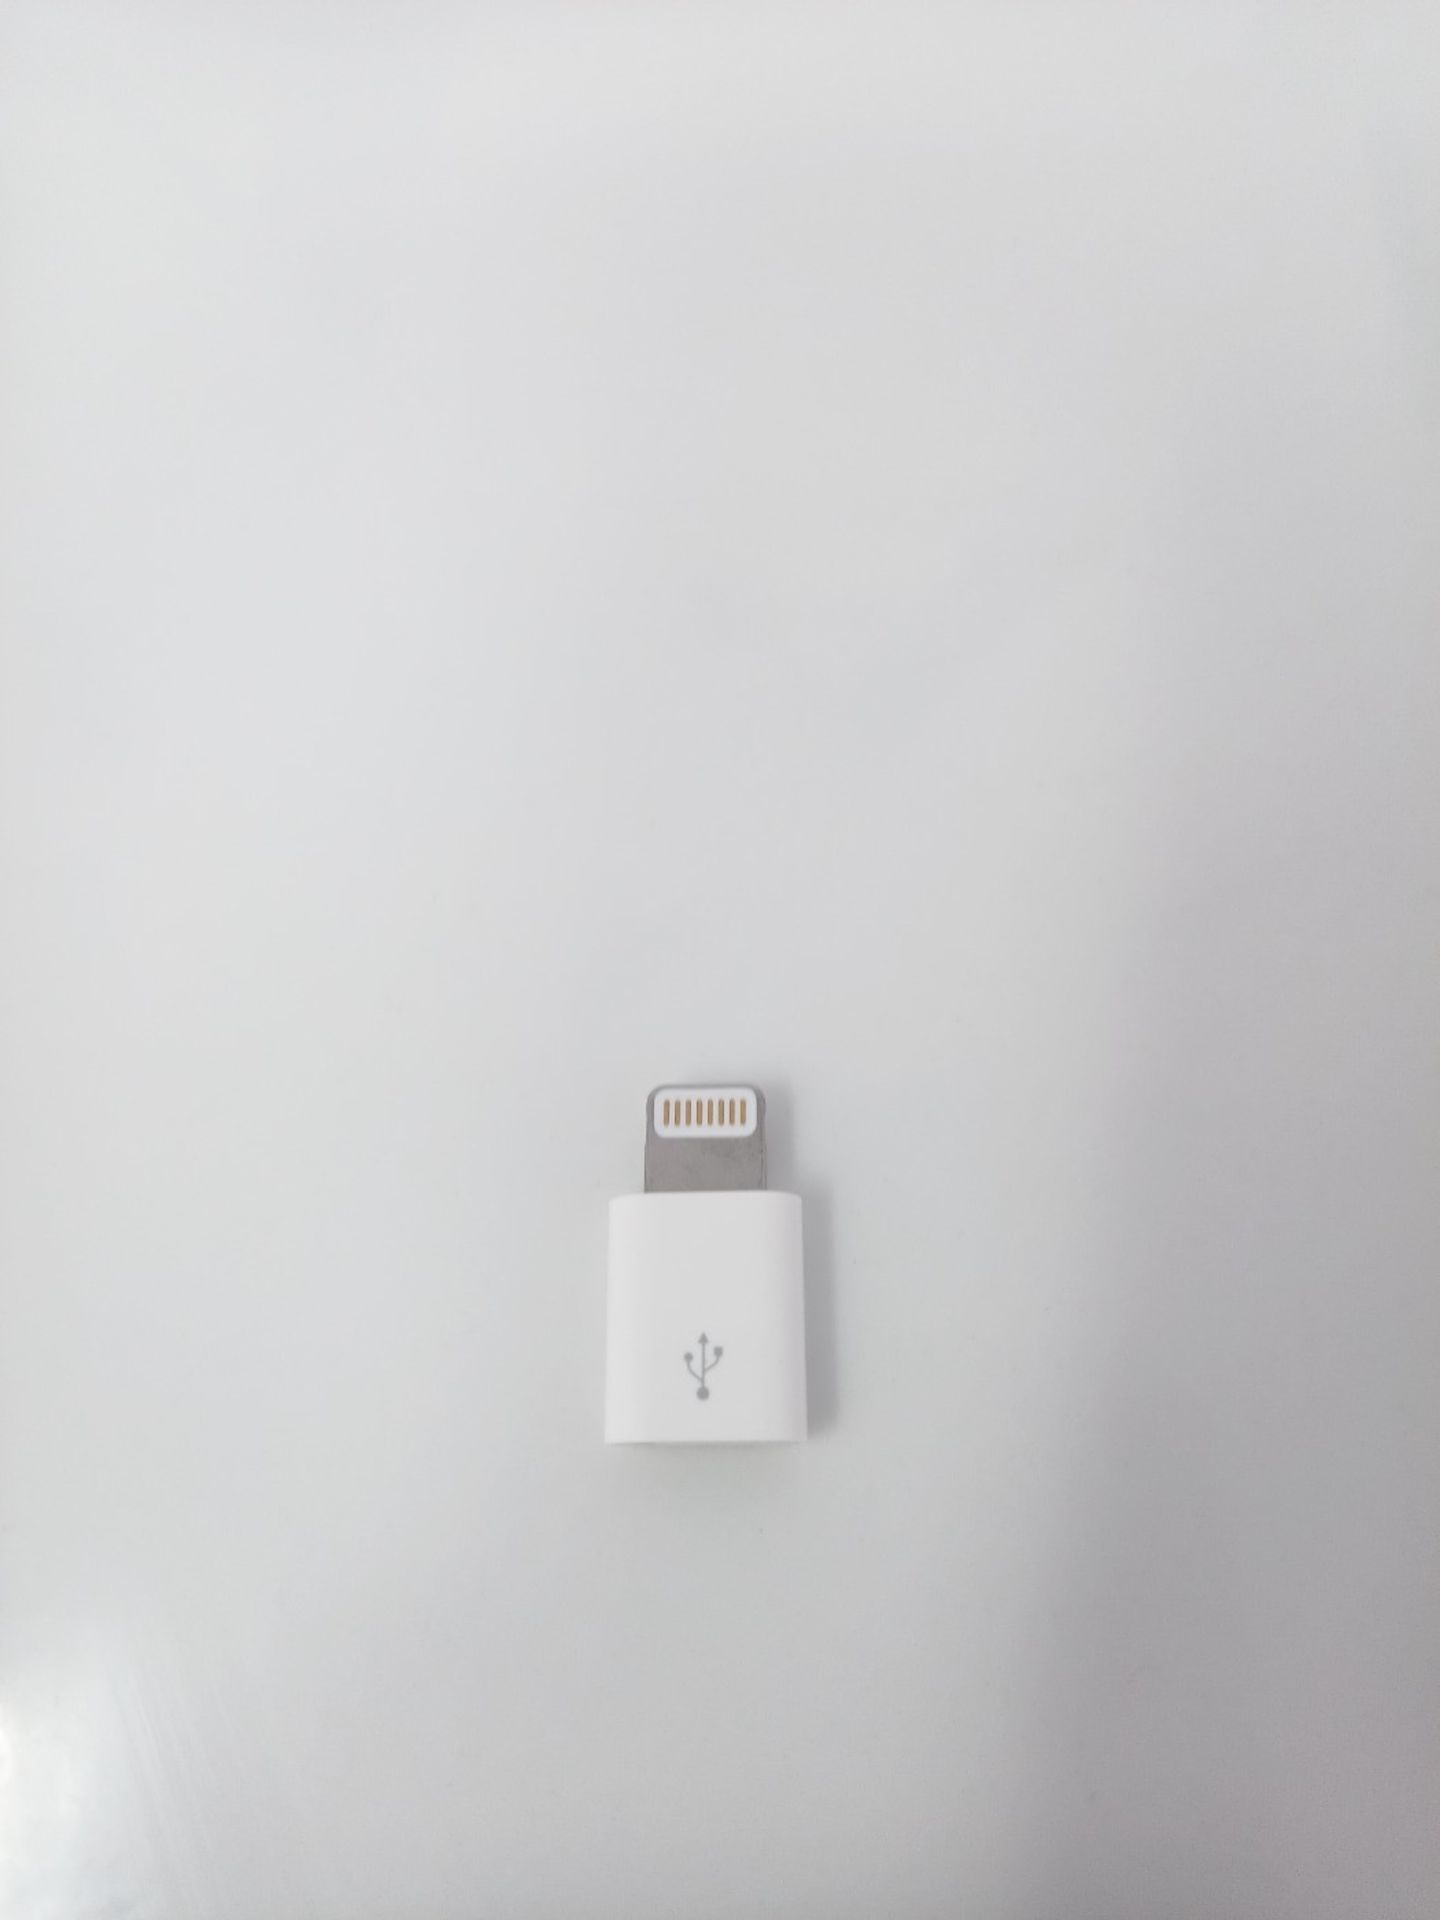 Apple MD820ZM/A micro USB adapter (8-pin) - Image 3 of 3